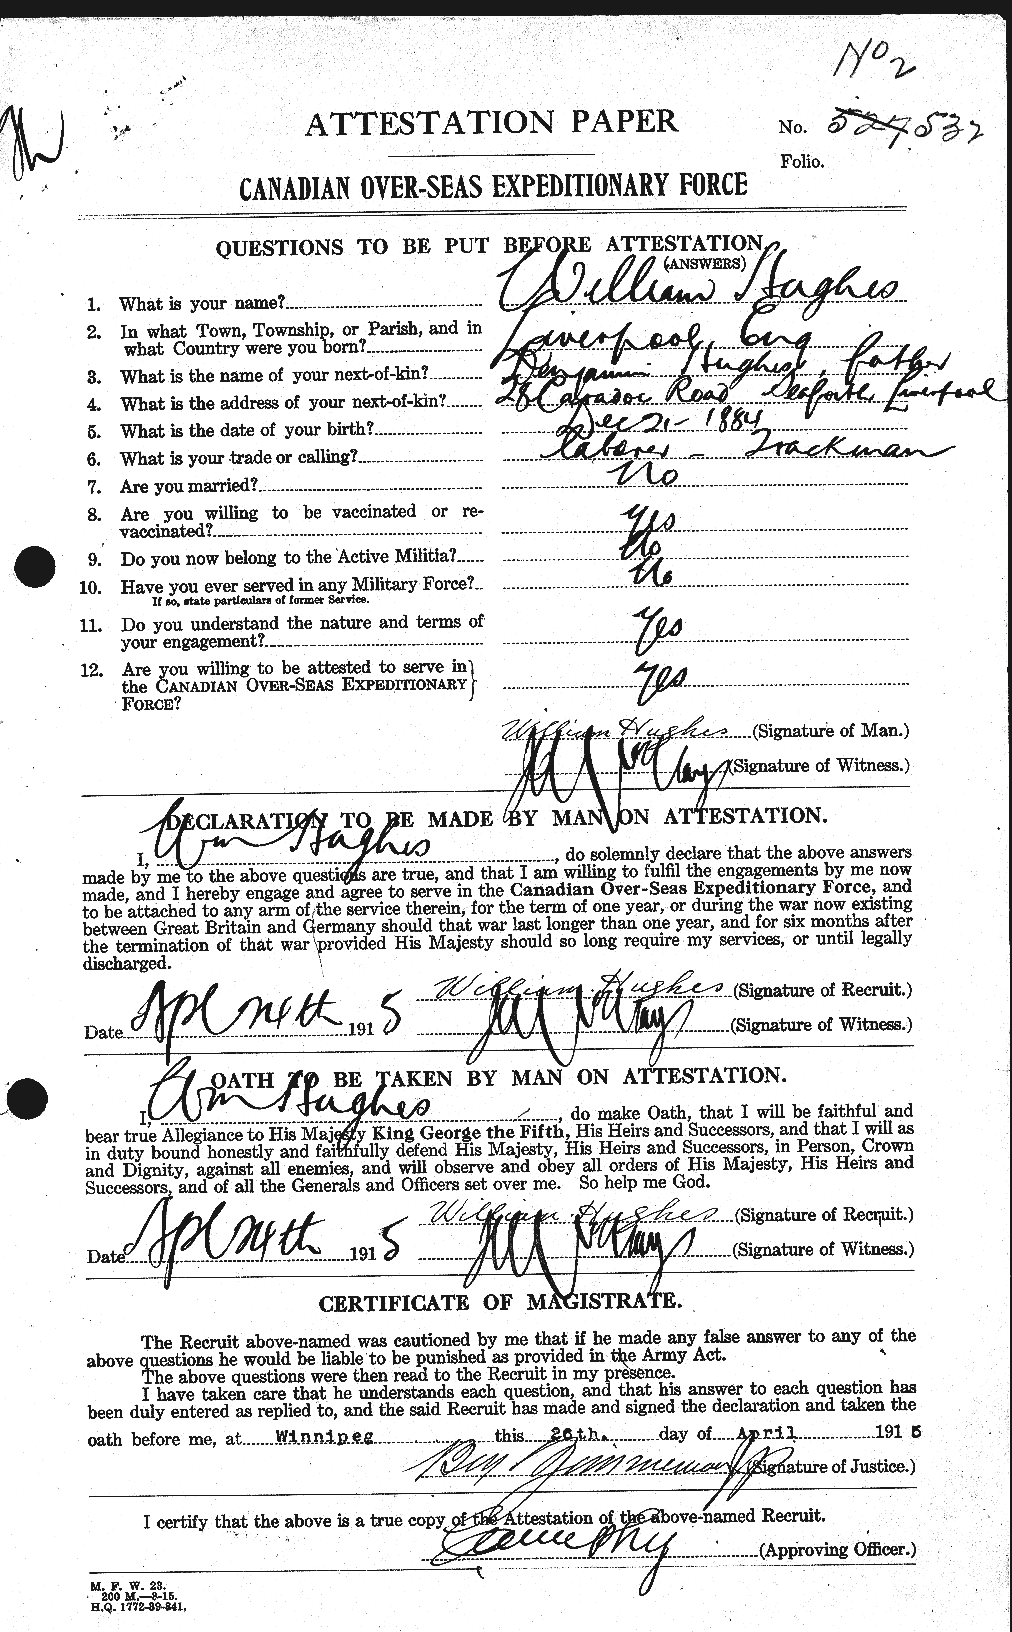 Personnel Records of the First World War - CEF 405884a